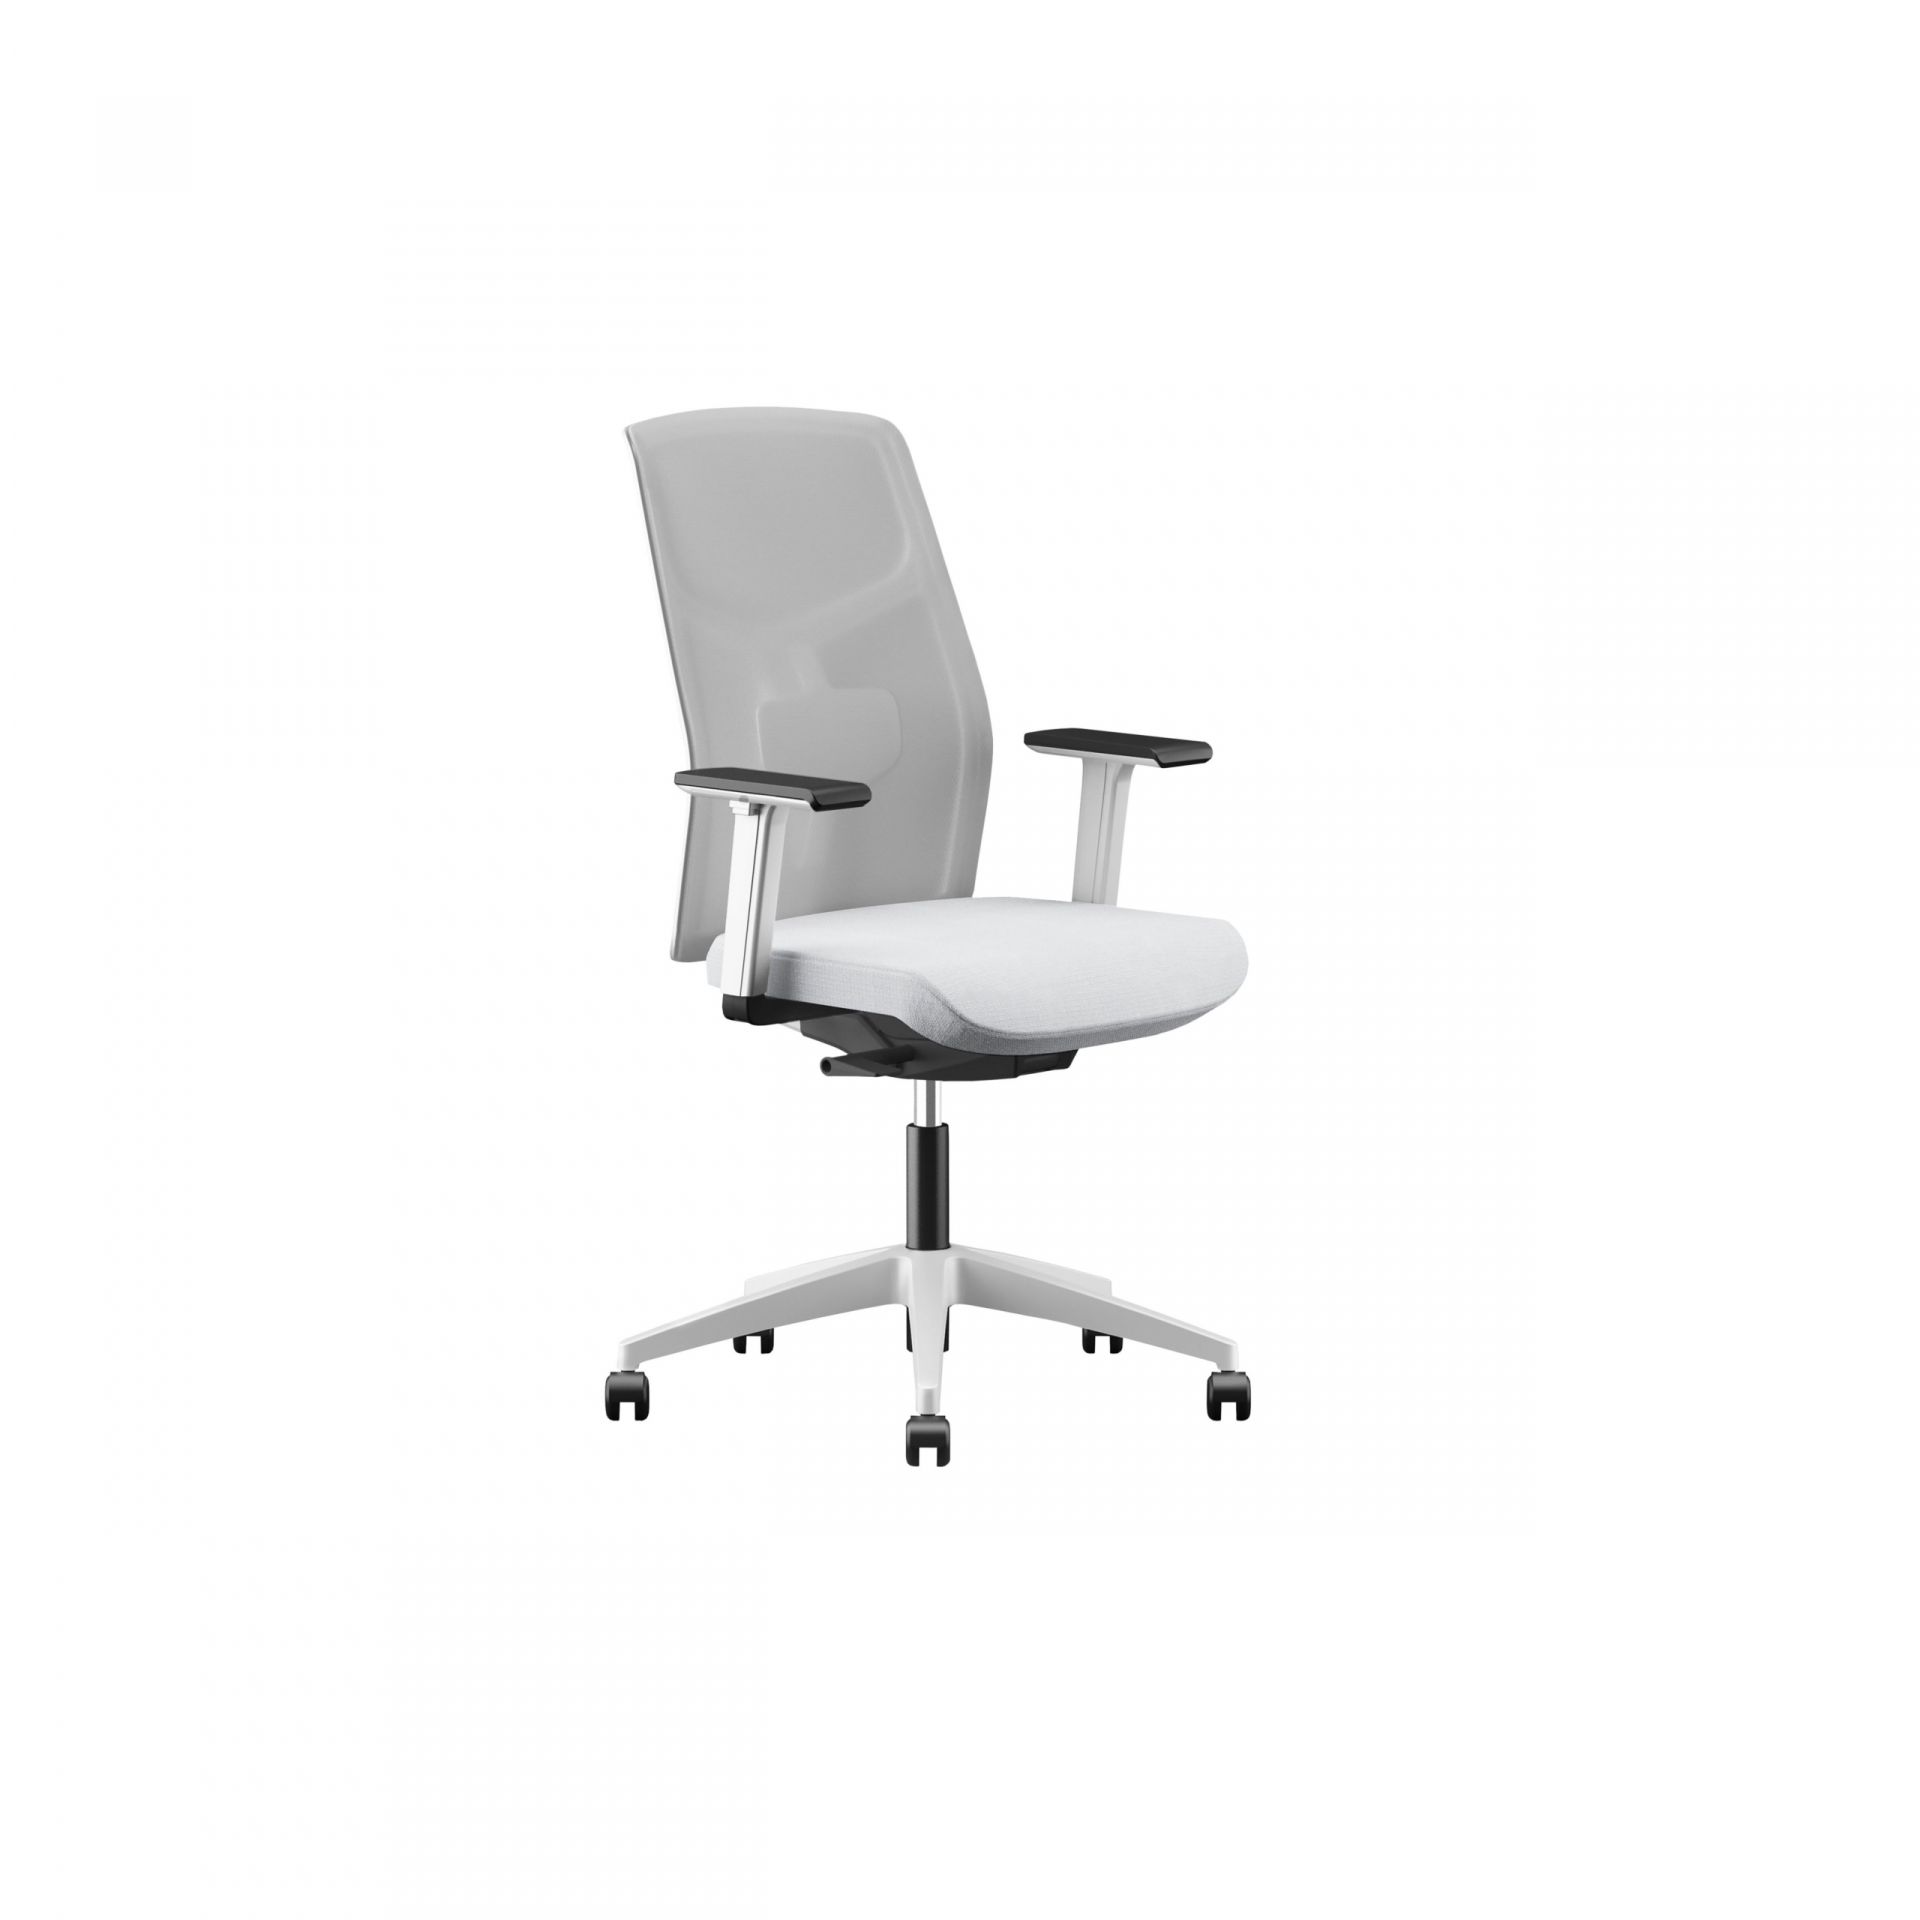 Yoyo Office chair with mesh back